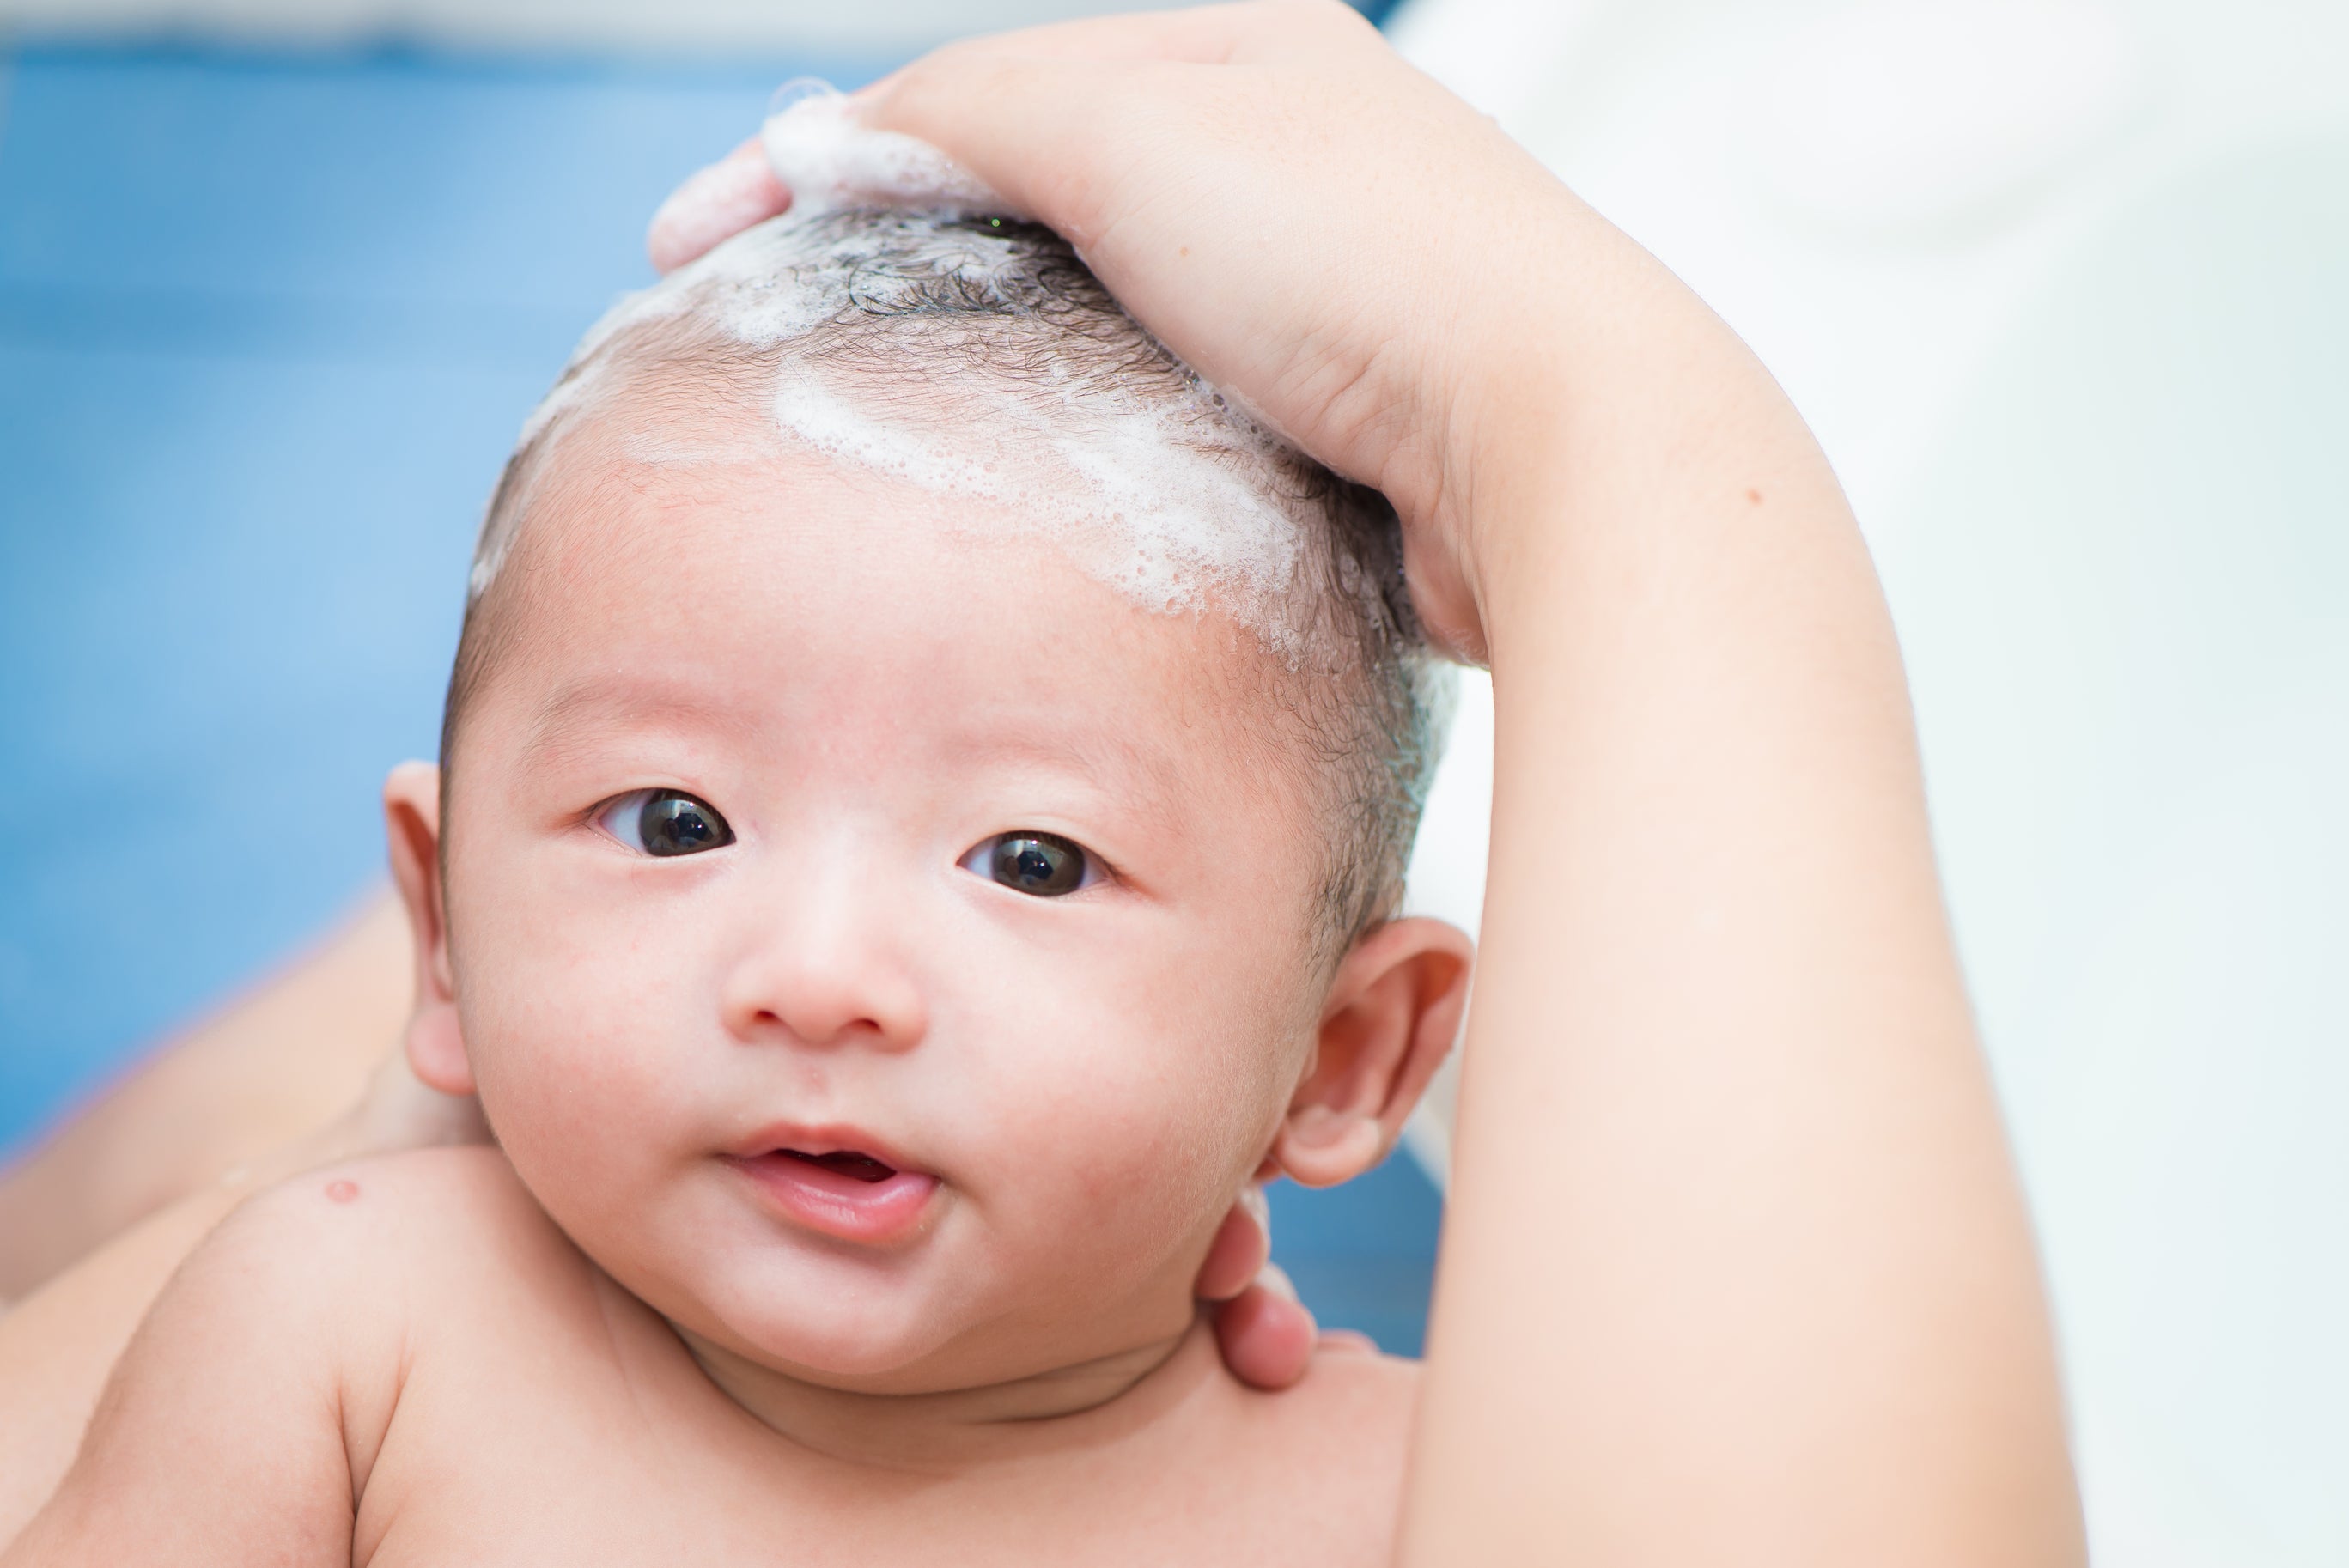 A mother shampooing her baby. Concept of baby shampoo, parabens, harmful ingredients.